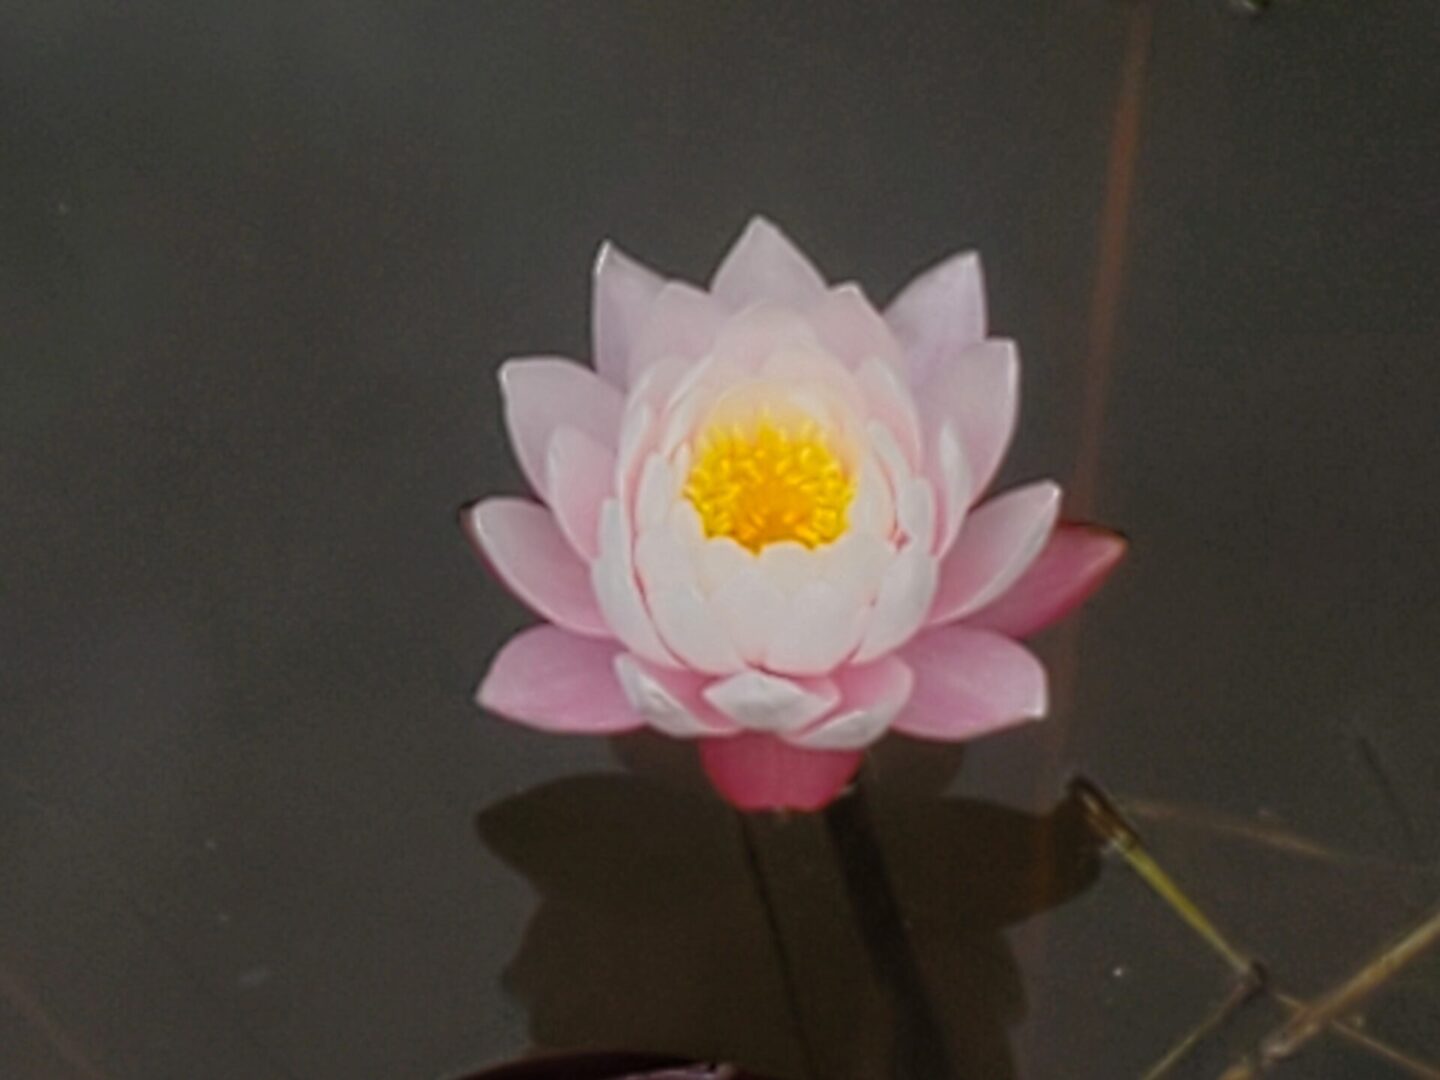 A pink flower with yellow center in water.